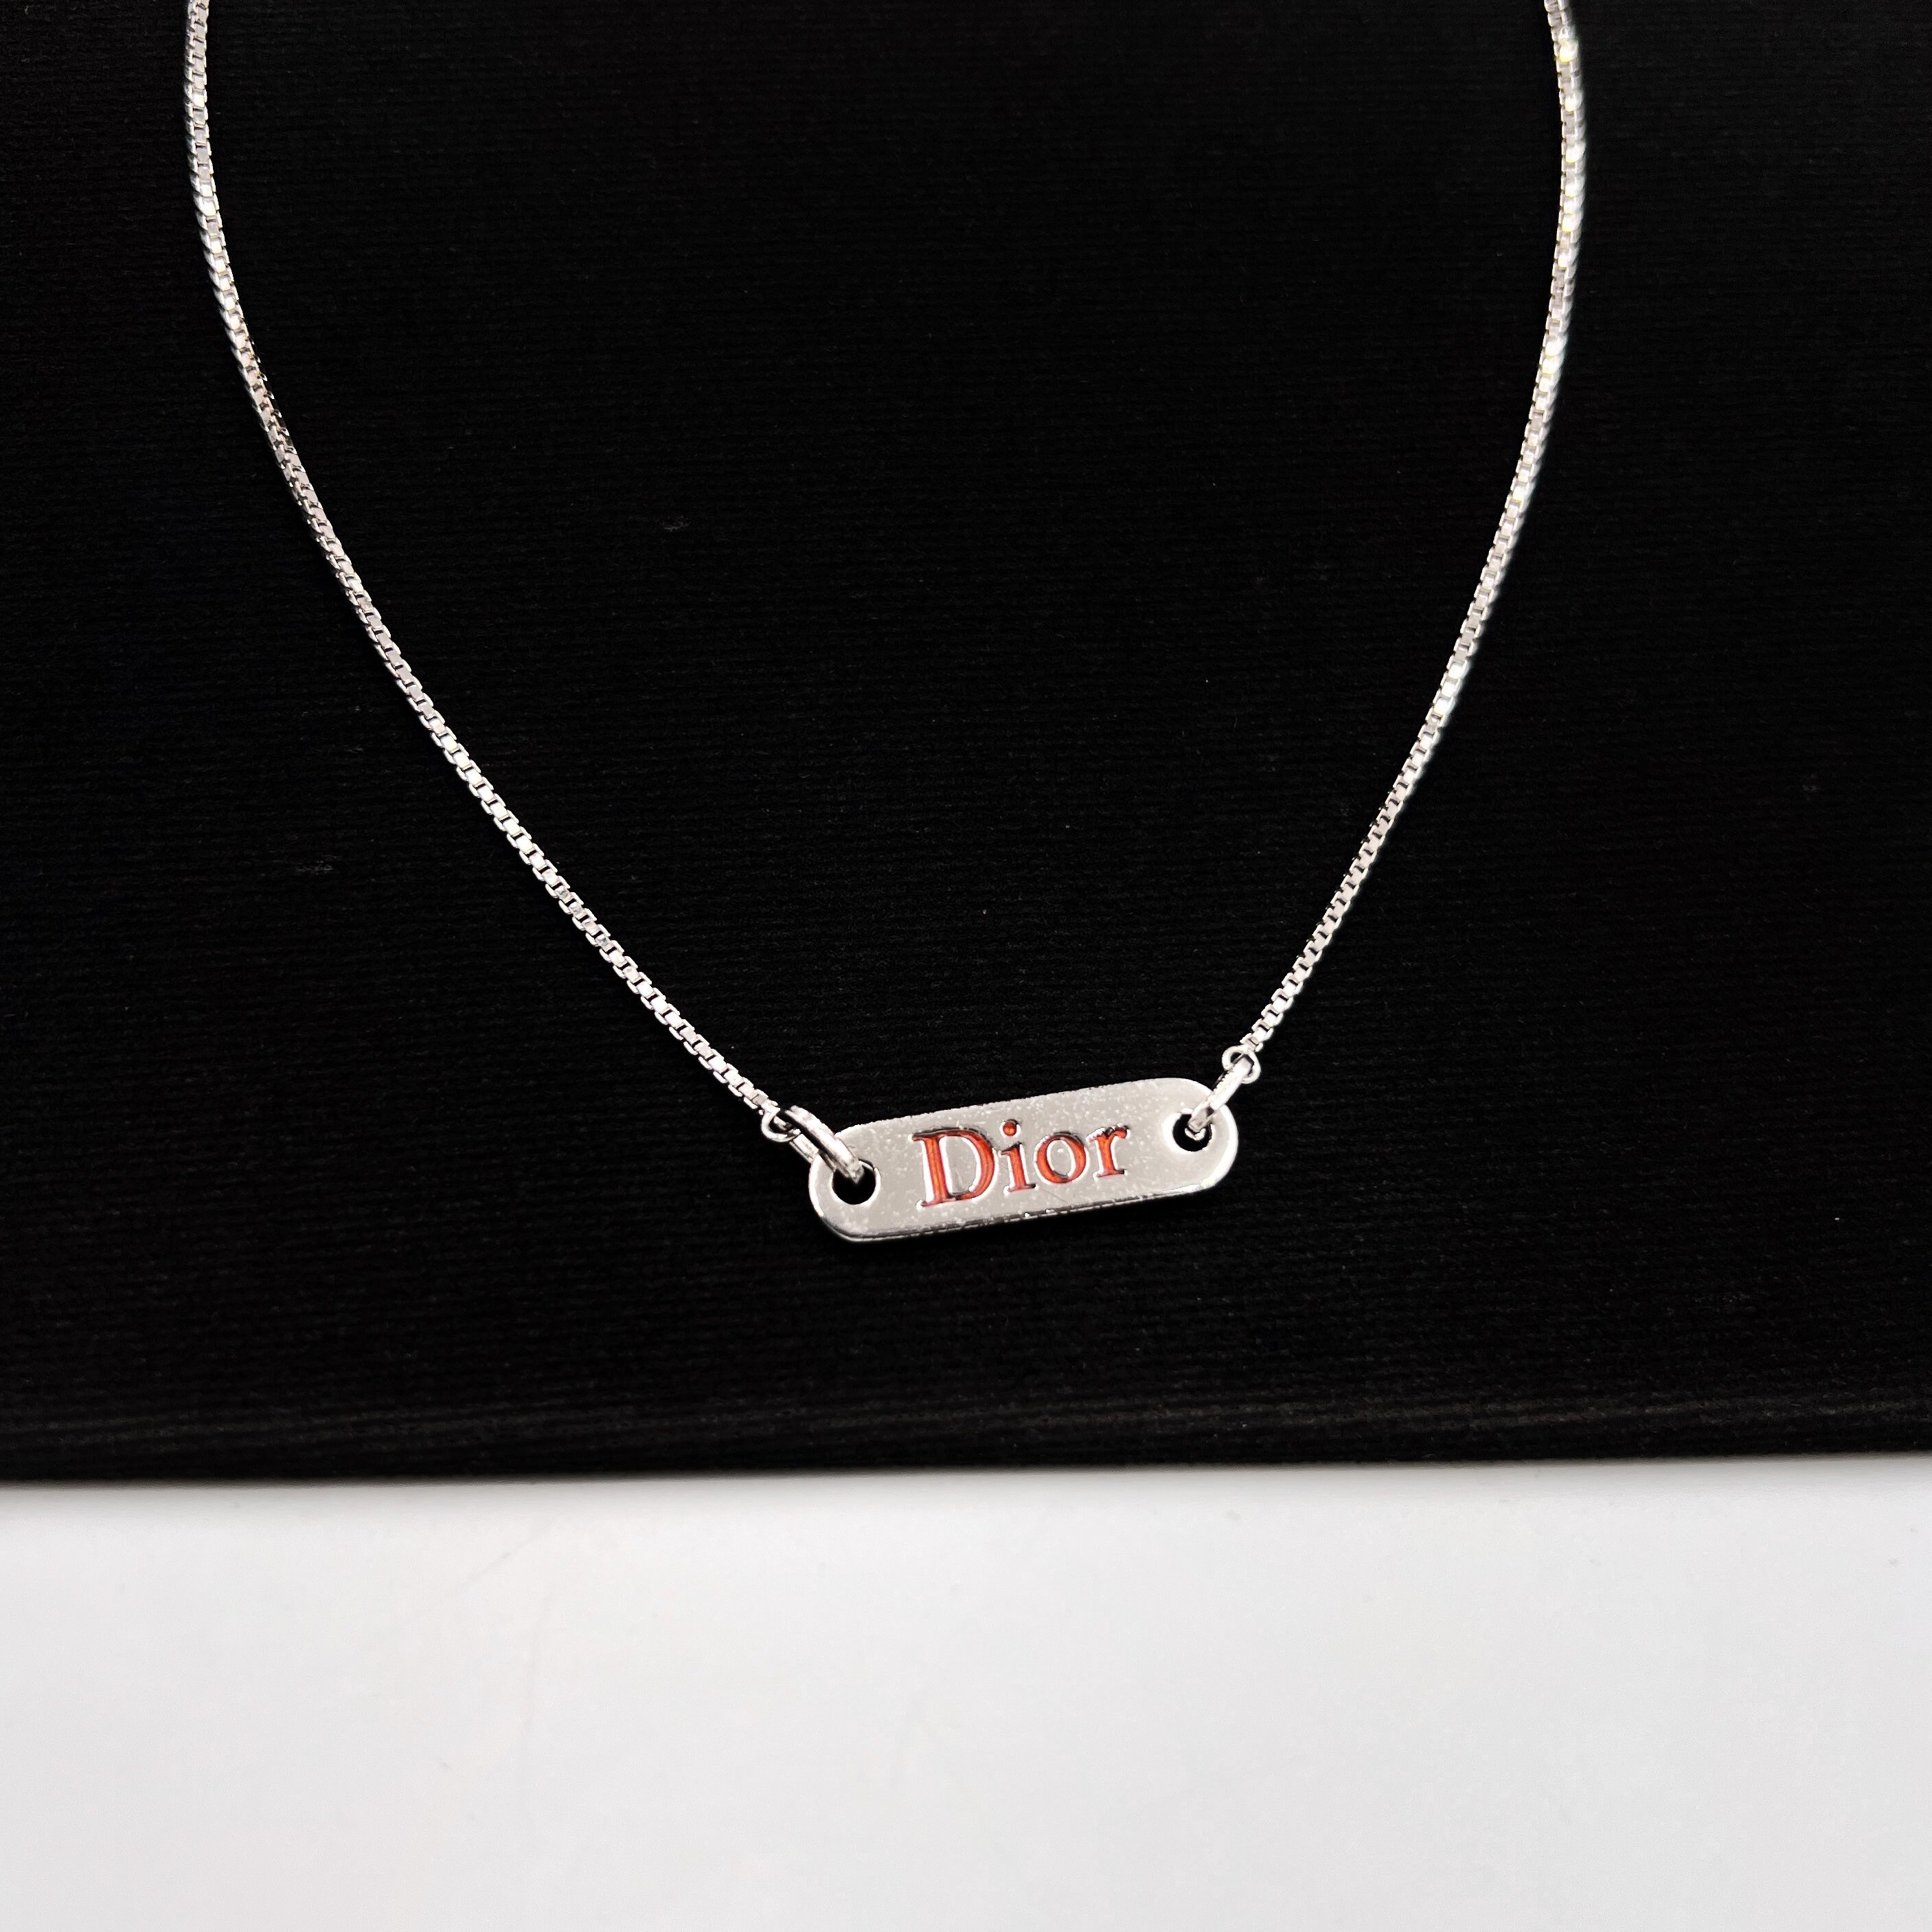 Dior - Authenticated Monogramme Necklace - Metal Silver for Women, Very Good Condition